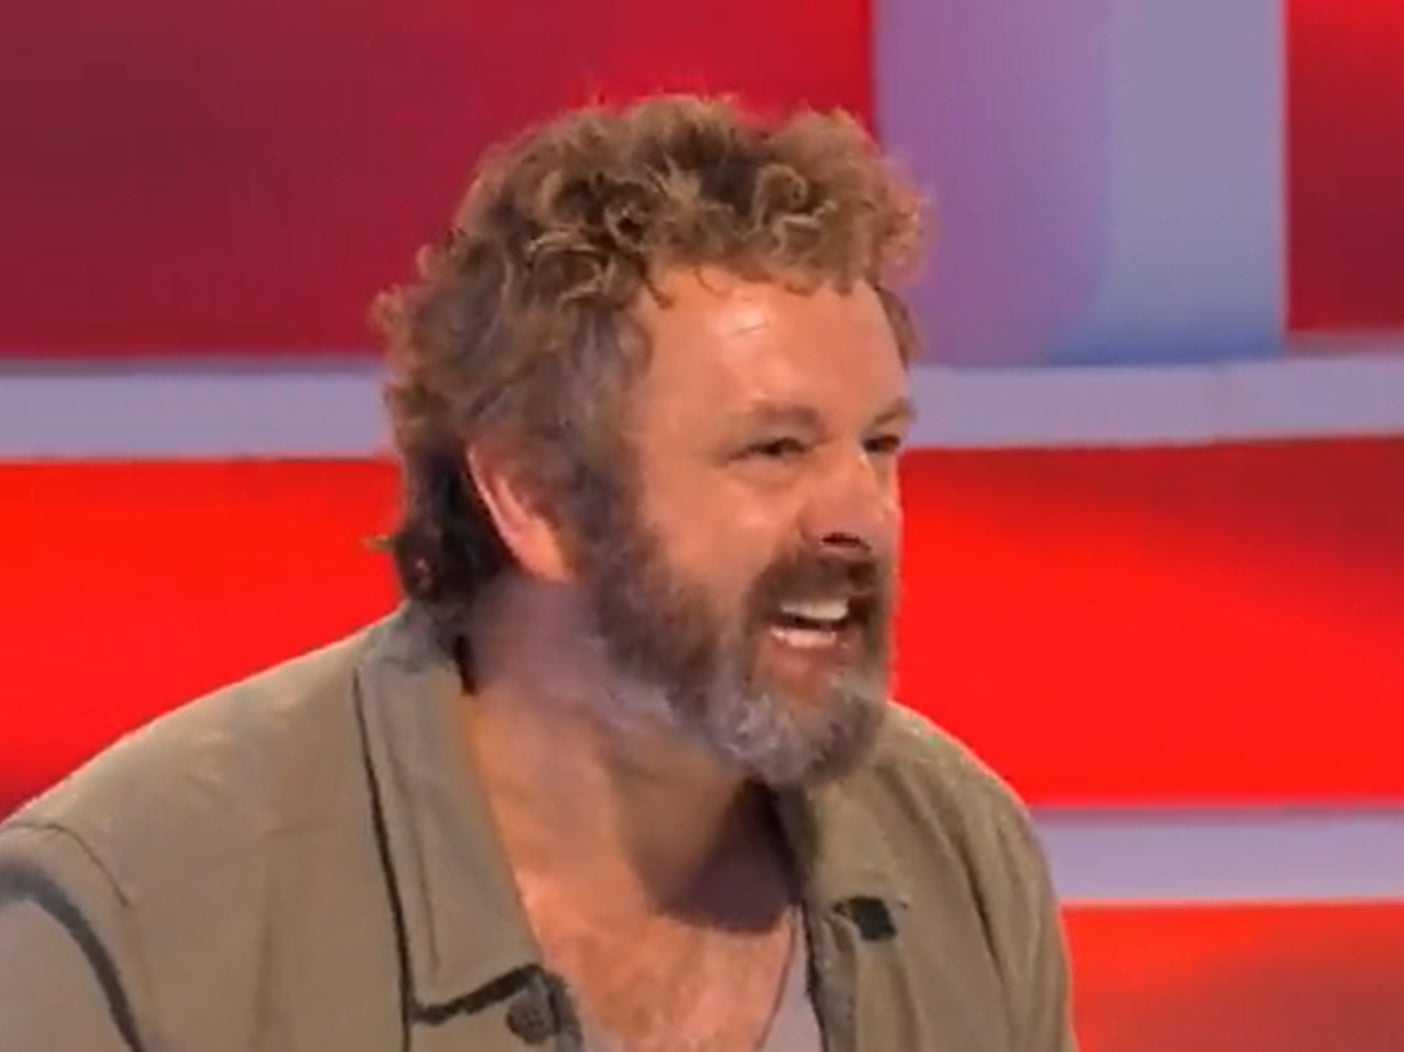 Michael Sheen on ‘A League of Their Own'